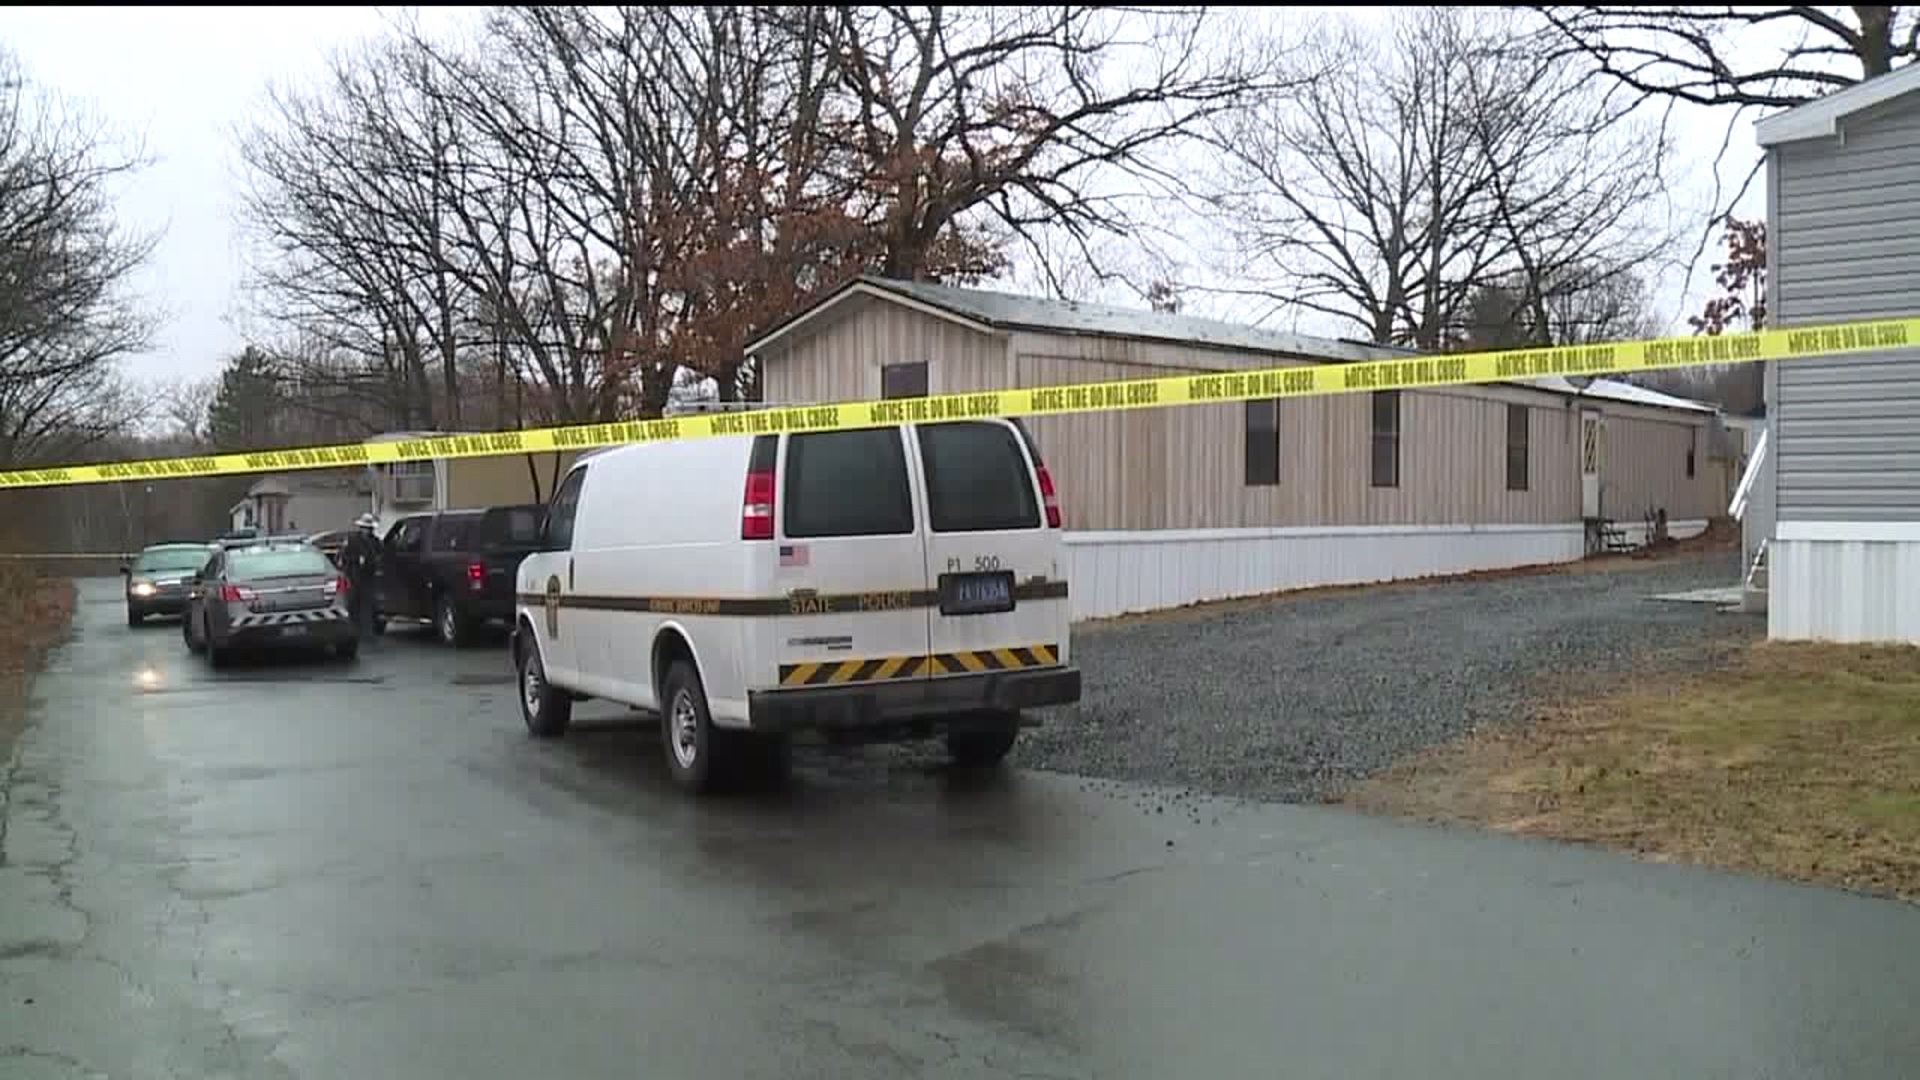 Remains Found in Plains Township Shed Identified